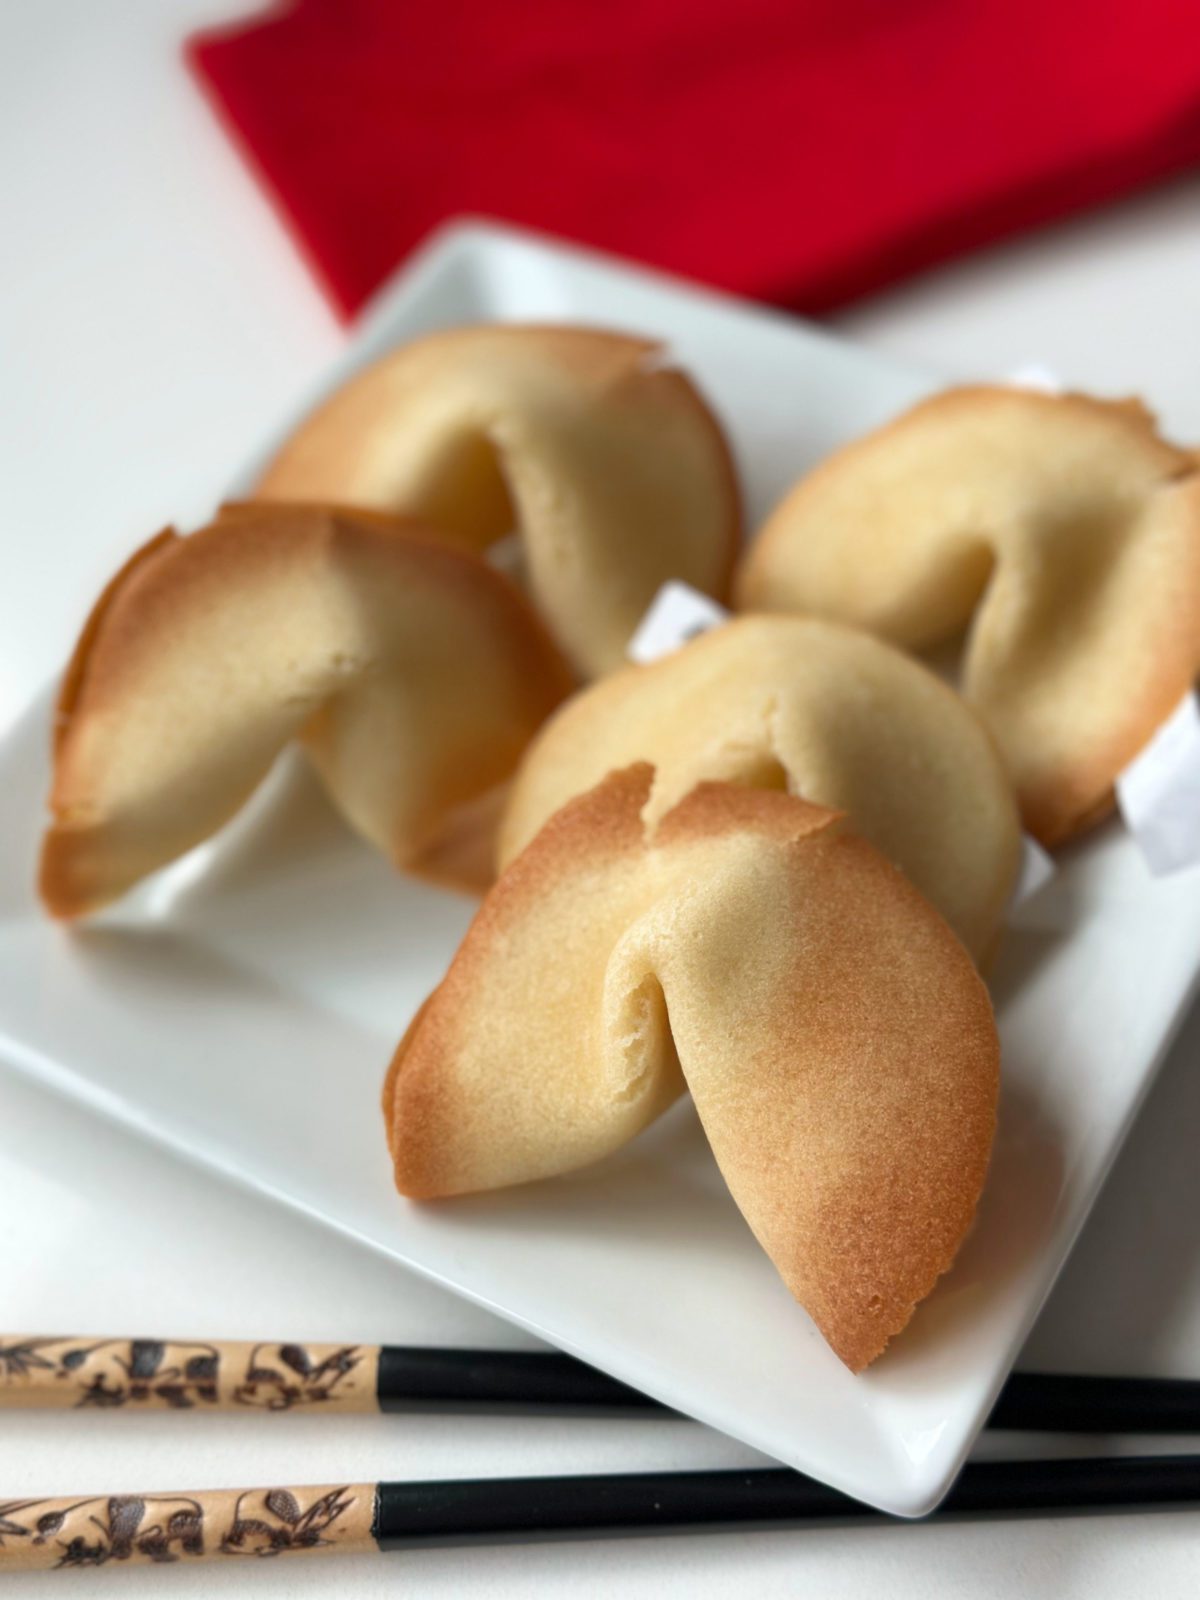 Five fortune cookies on a plate with chopsticks.